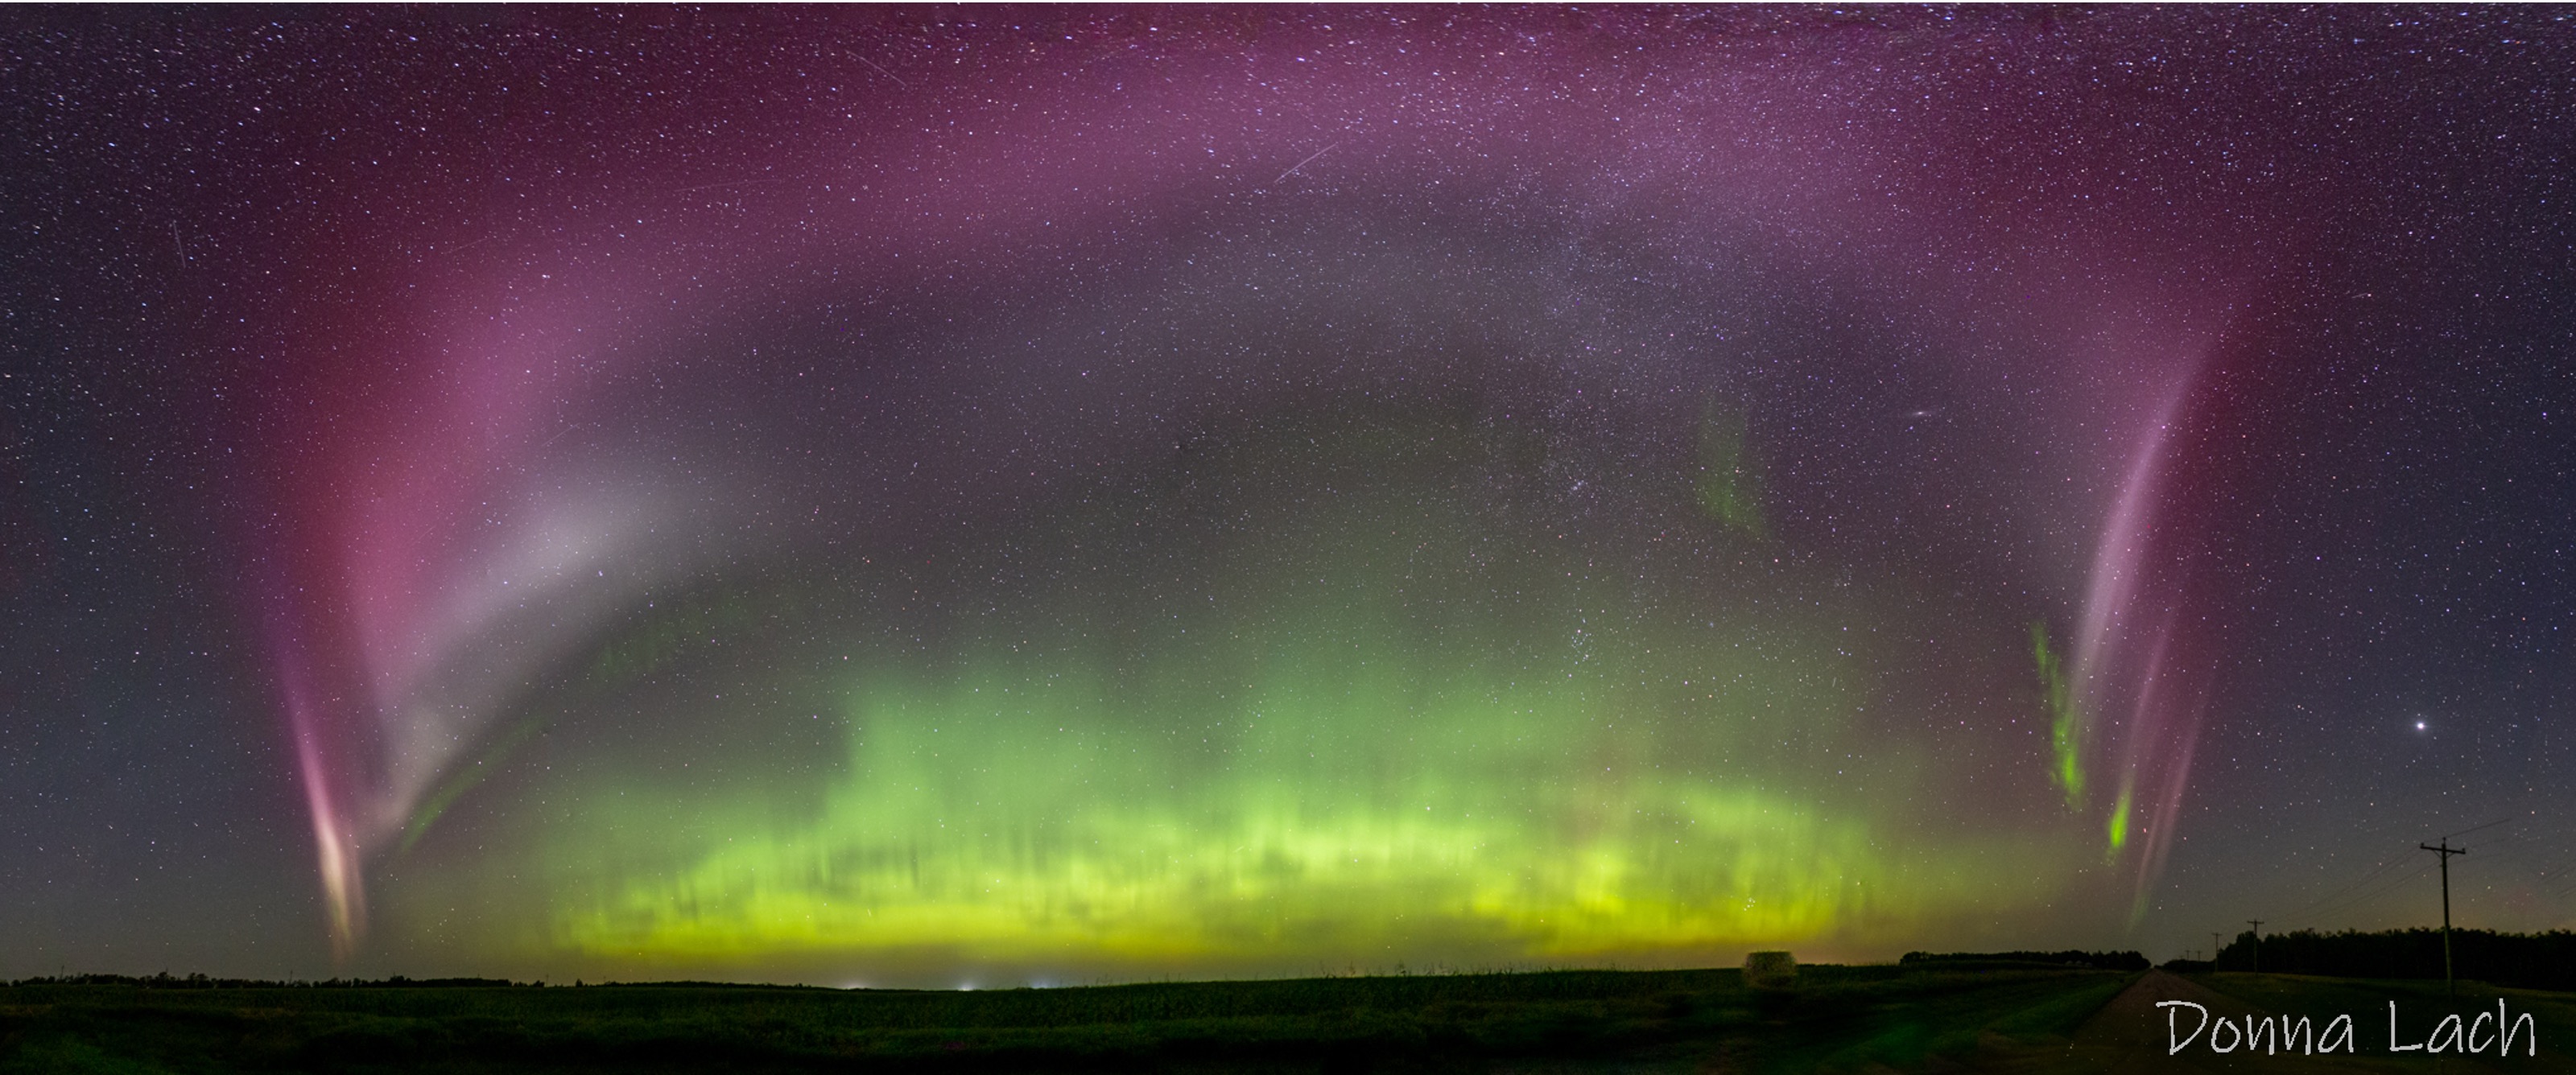 In a starry night-time panorama, a purple and grey arc stretches from side to side (east to west) over a silhouetted plain, framing green aurora in the distance. Directly beneath the arc are green stripes, the “picket fence” features that occur with STEVE.